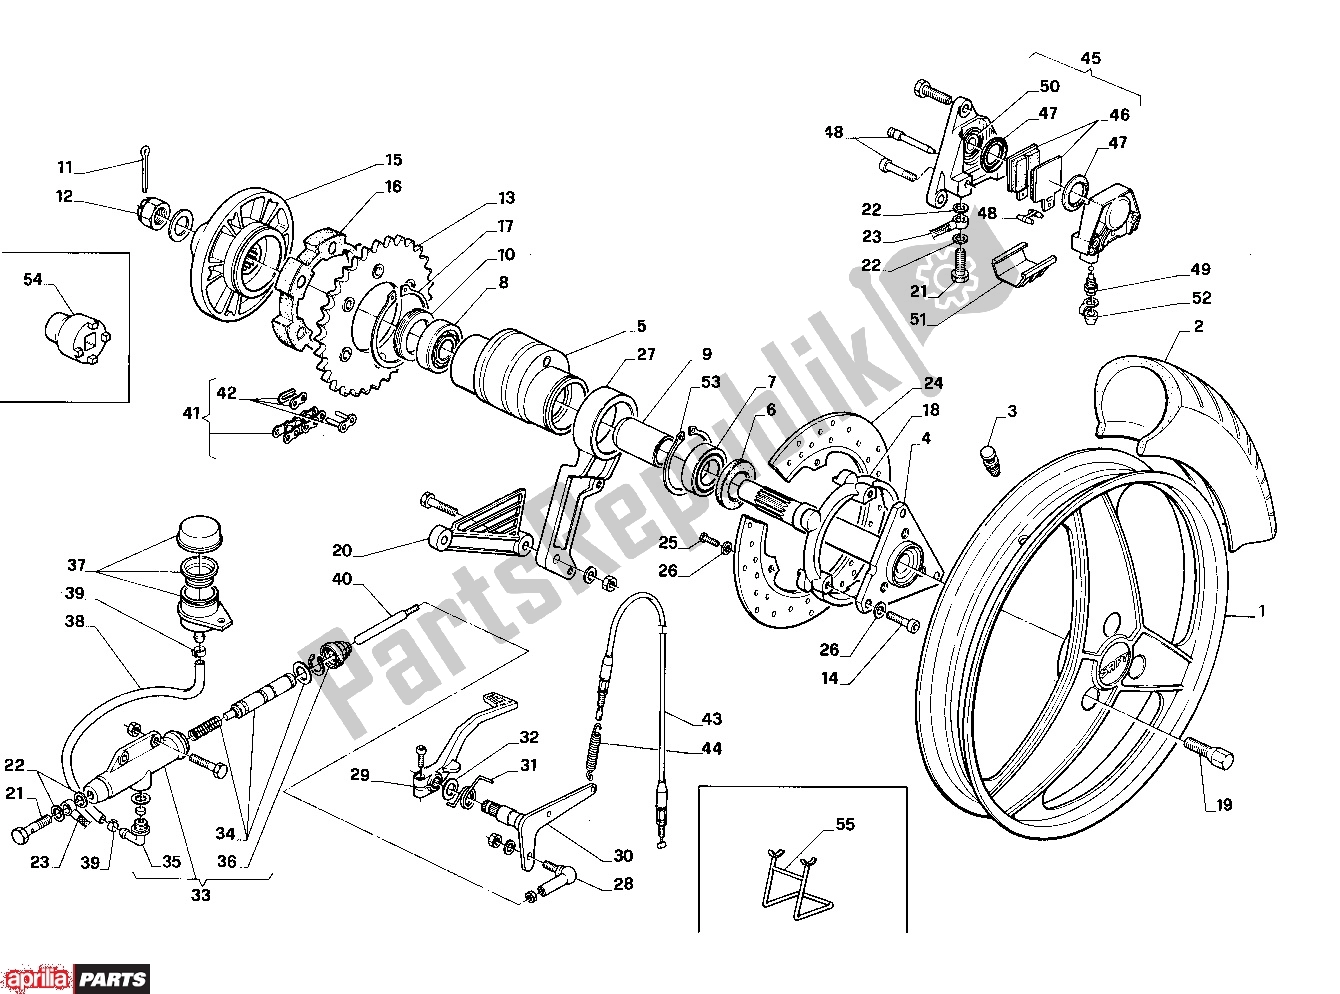 All parts for the Rear Wheel of the Aprilia AF1 304 125 1987